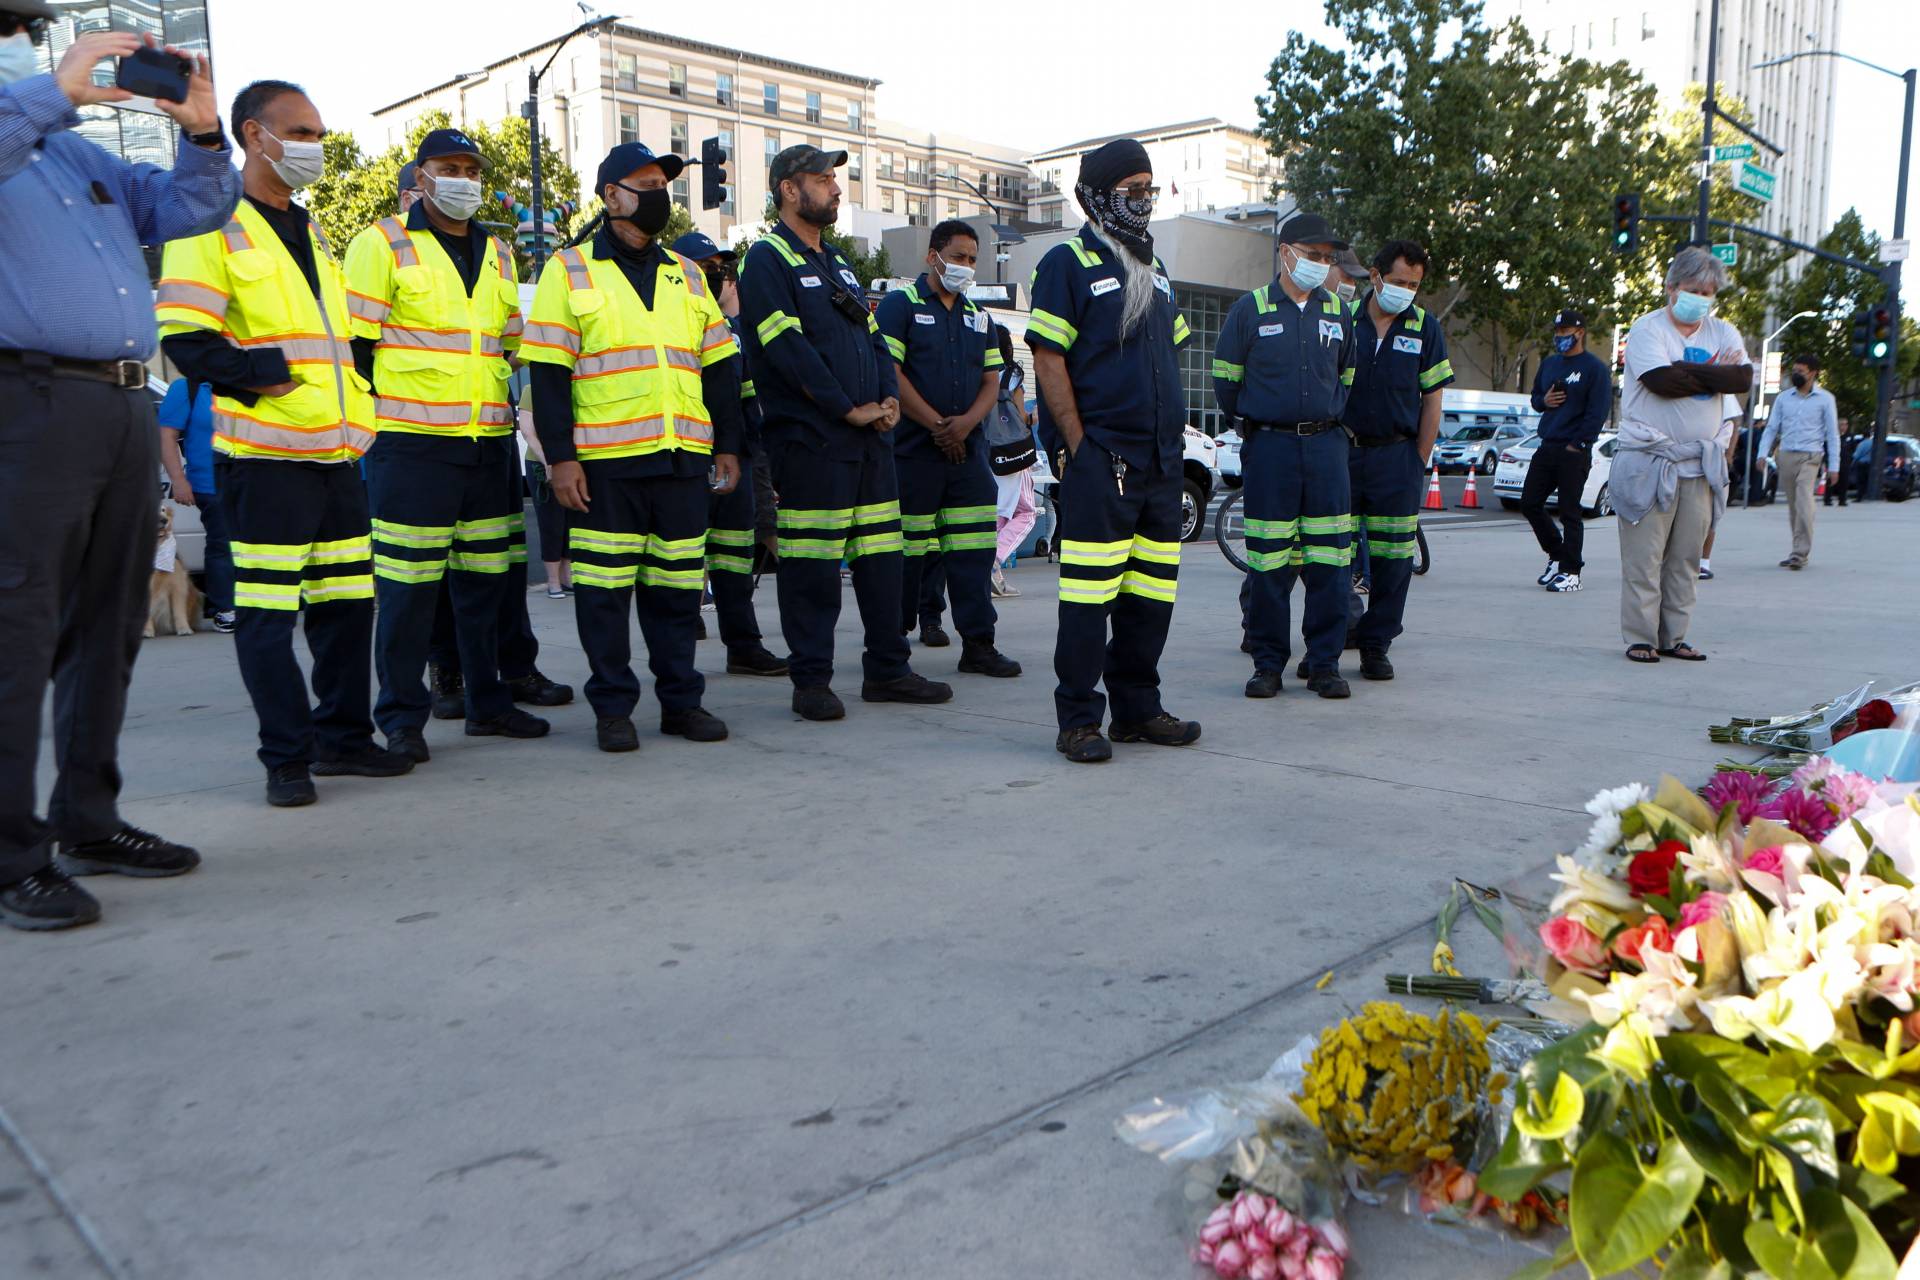 A line of people in uniform -- neon yellow jackets and dark blue pants with reflective stripes at the knees -- stand before a collection of flowers.